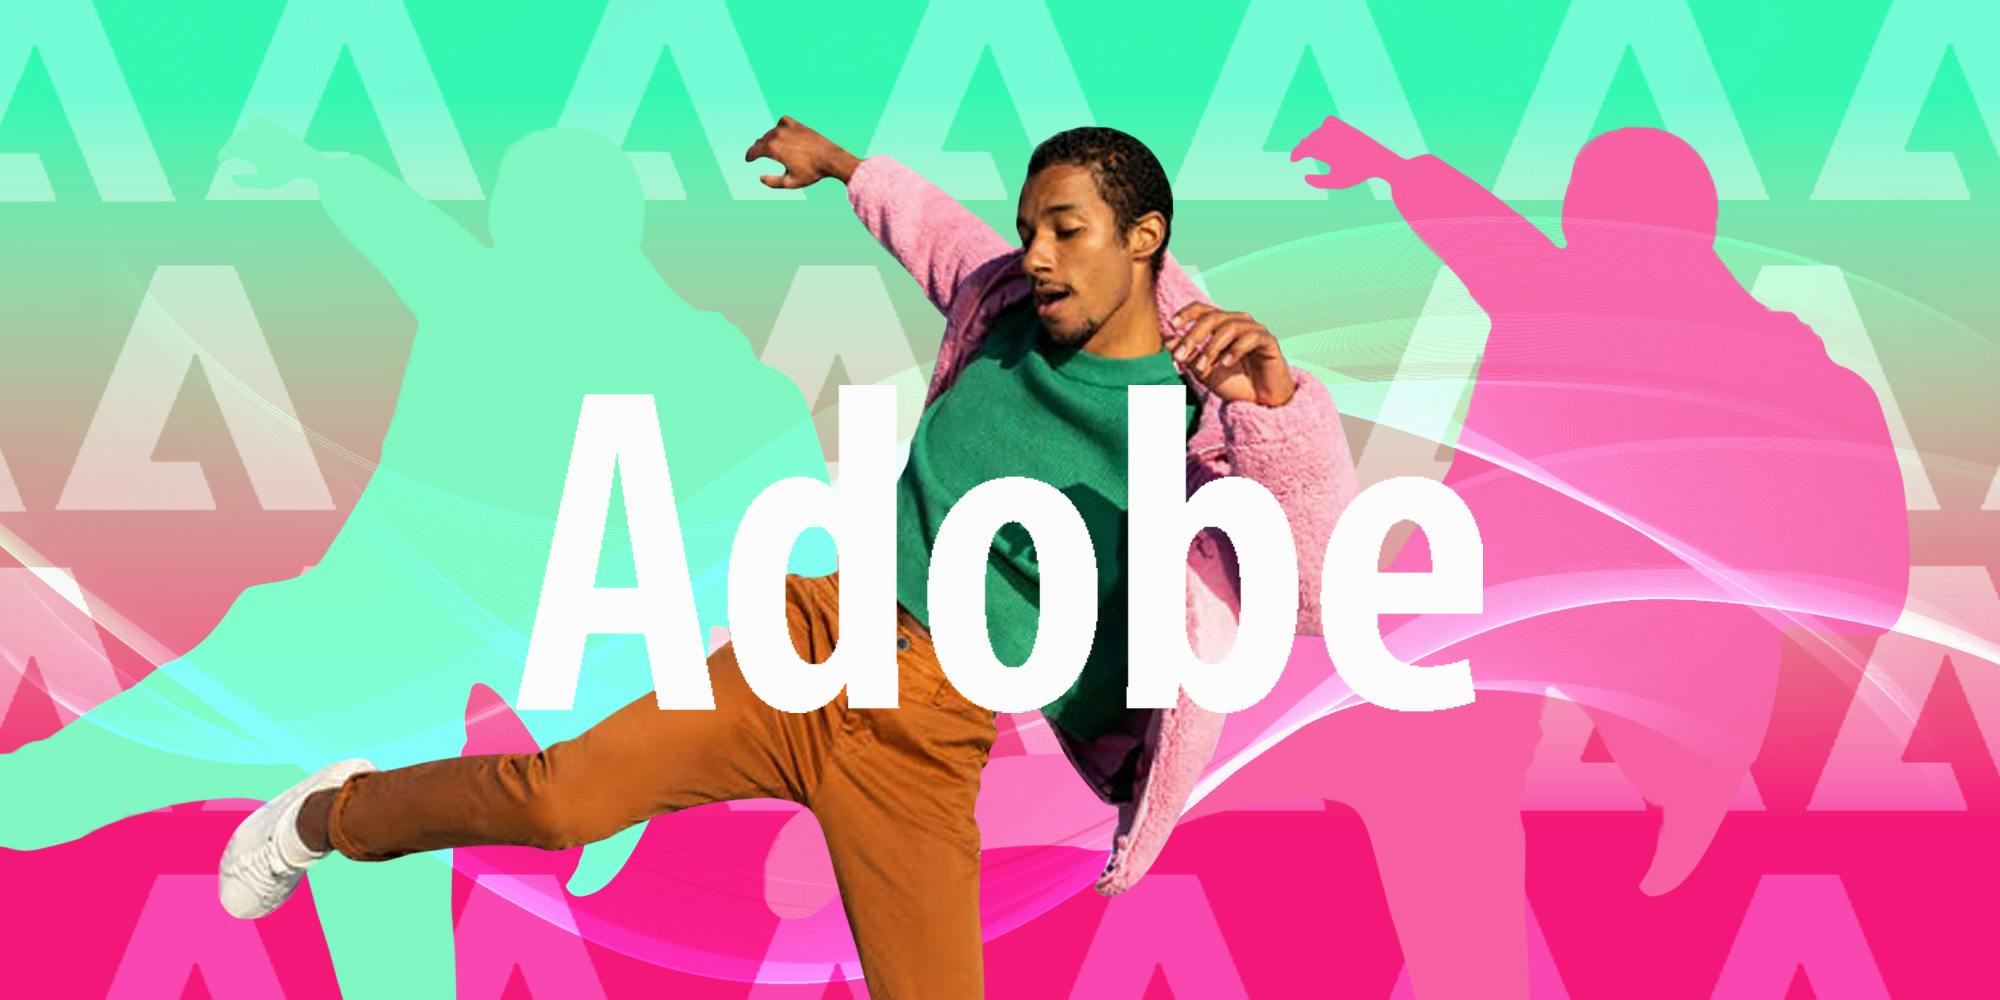 Adobe’s annual Creative Trends report shares its top four social media trends for 2023